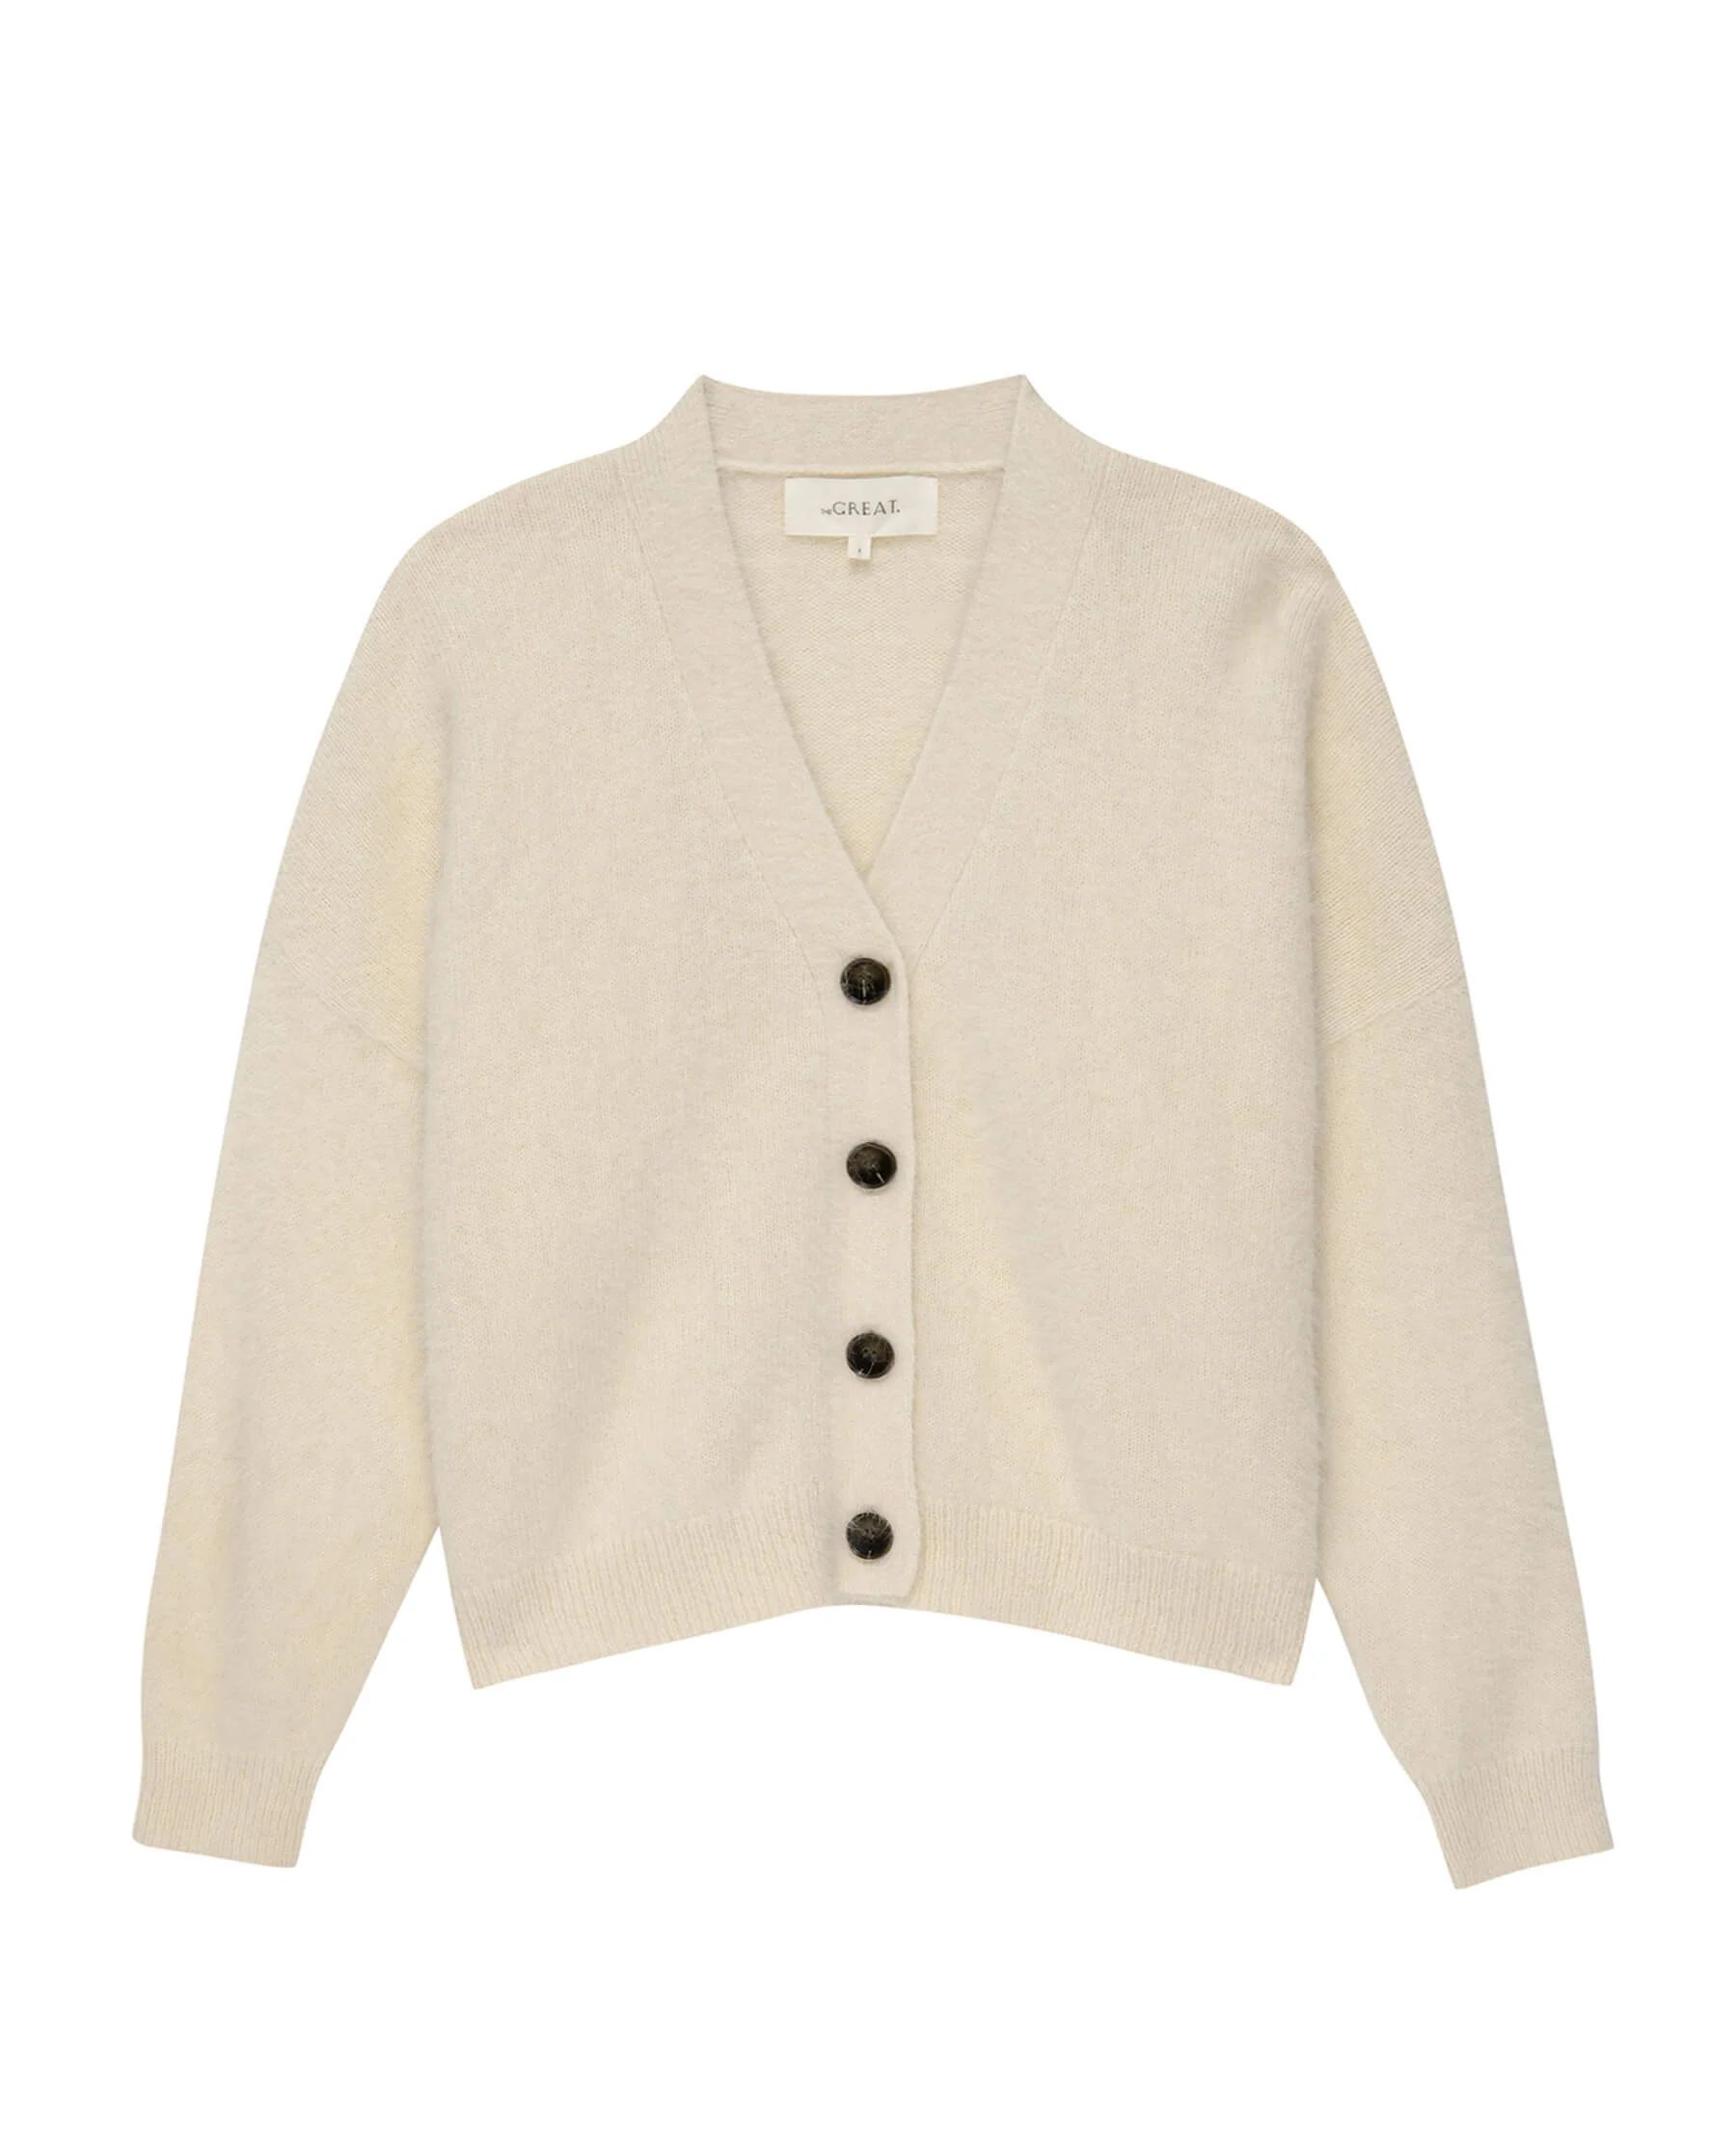 The Fluffy Slouch Cardigan. | THE GREAT.